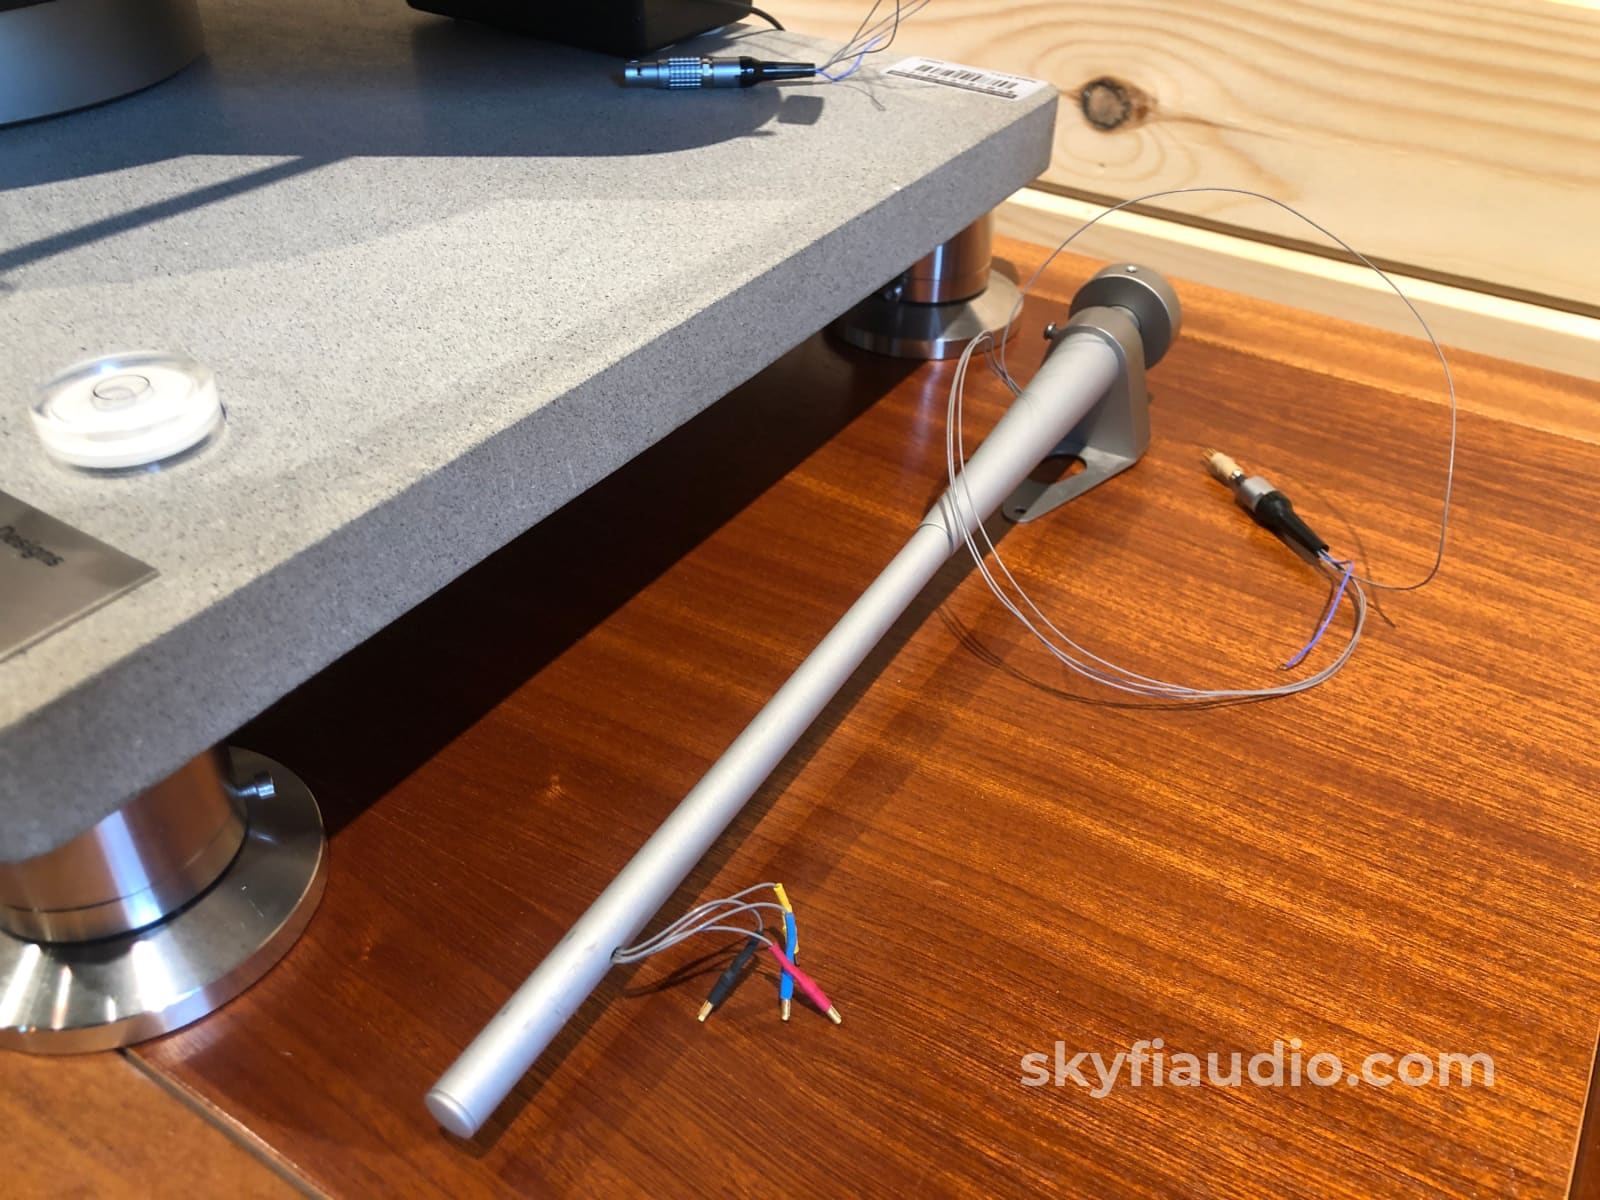 Simon Yorke Designs Model 10 Turntable With Two Tonearms + Wands Upgrades